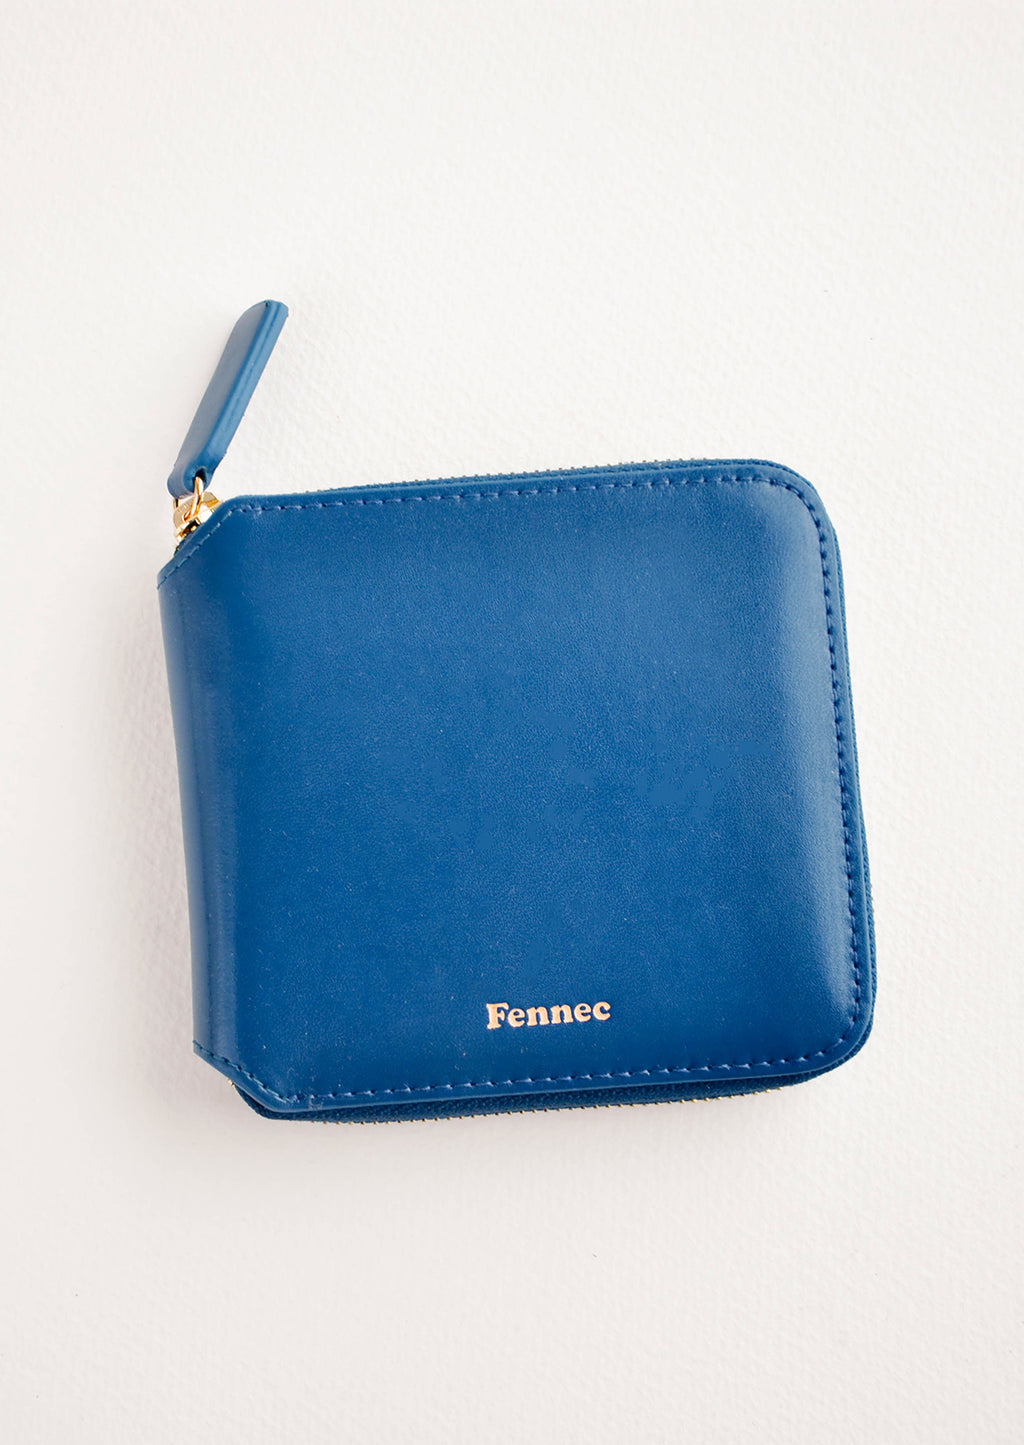 Deep Blue: Dark blue leather wallet that zips on three sides, with matching tab pull.